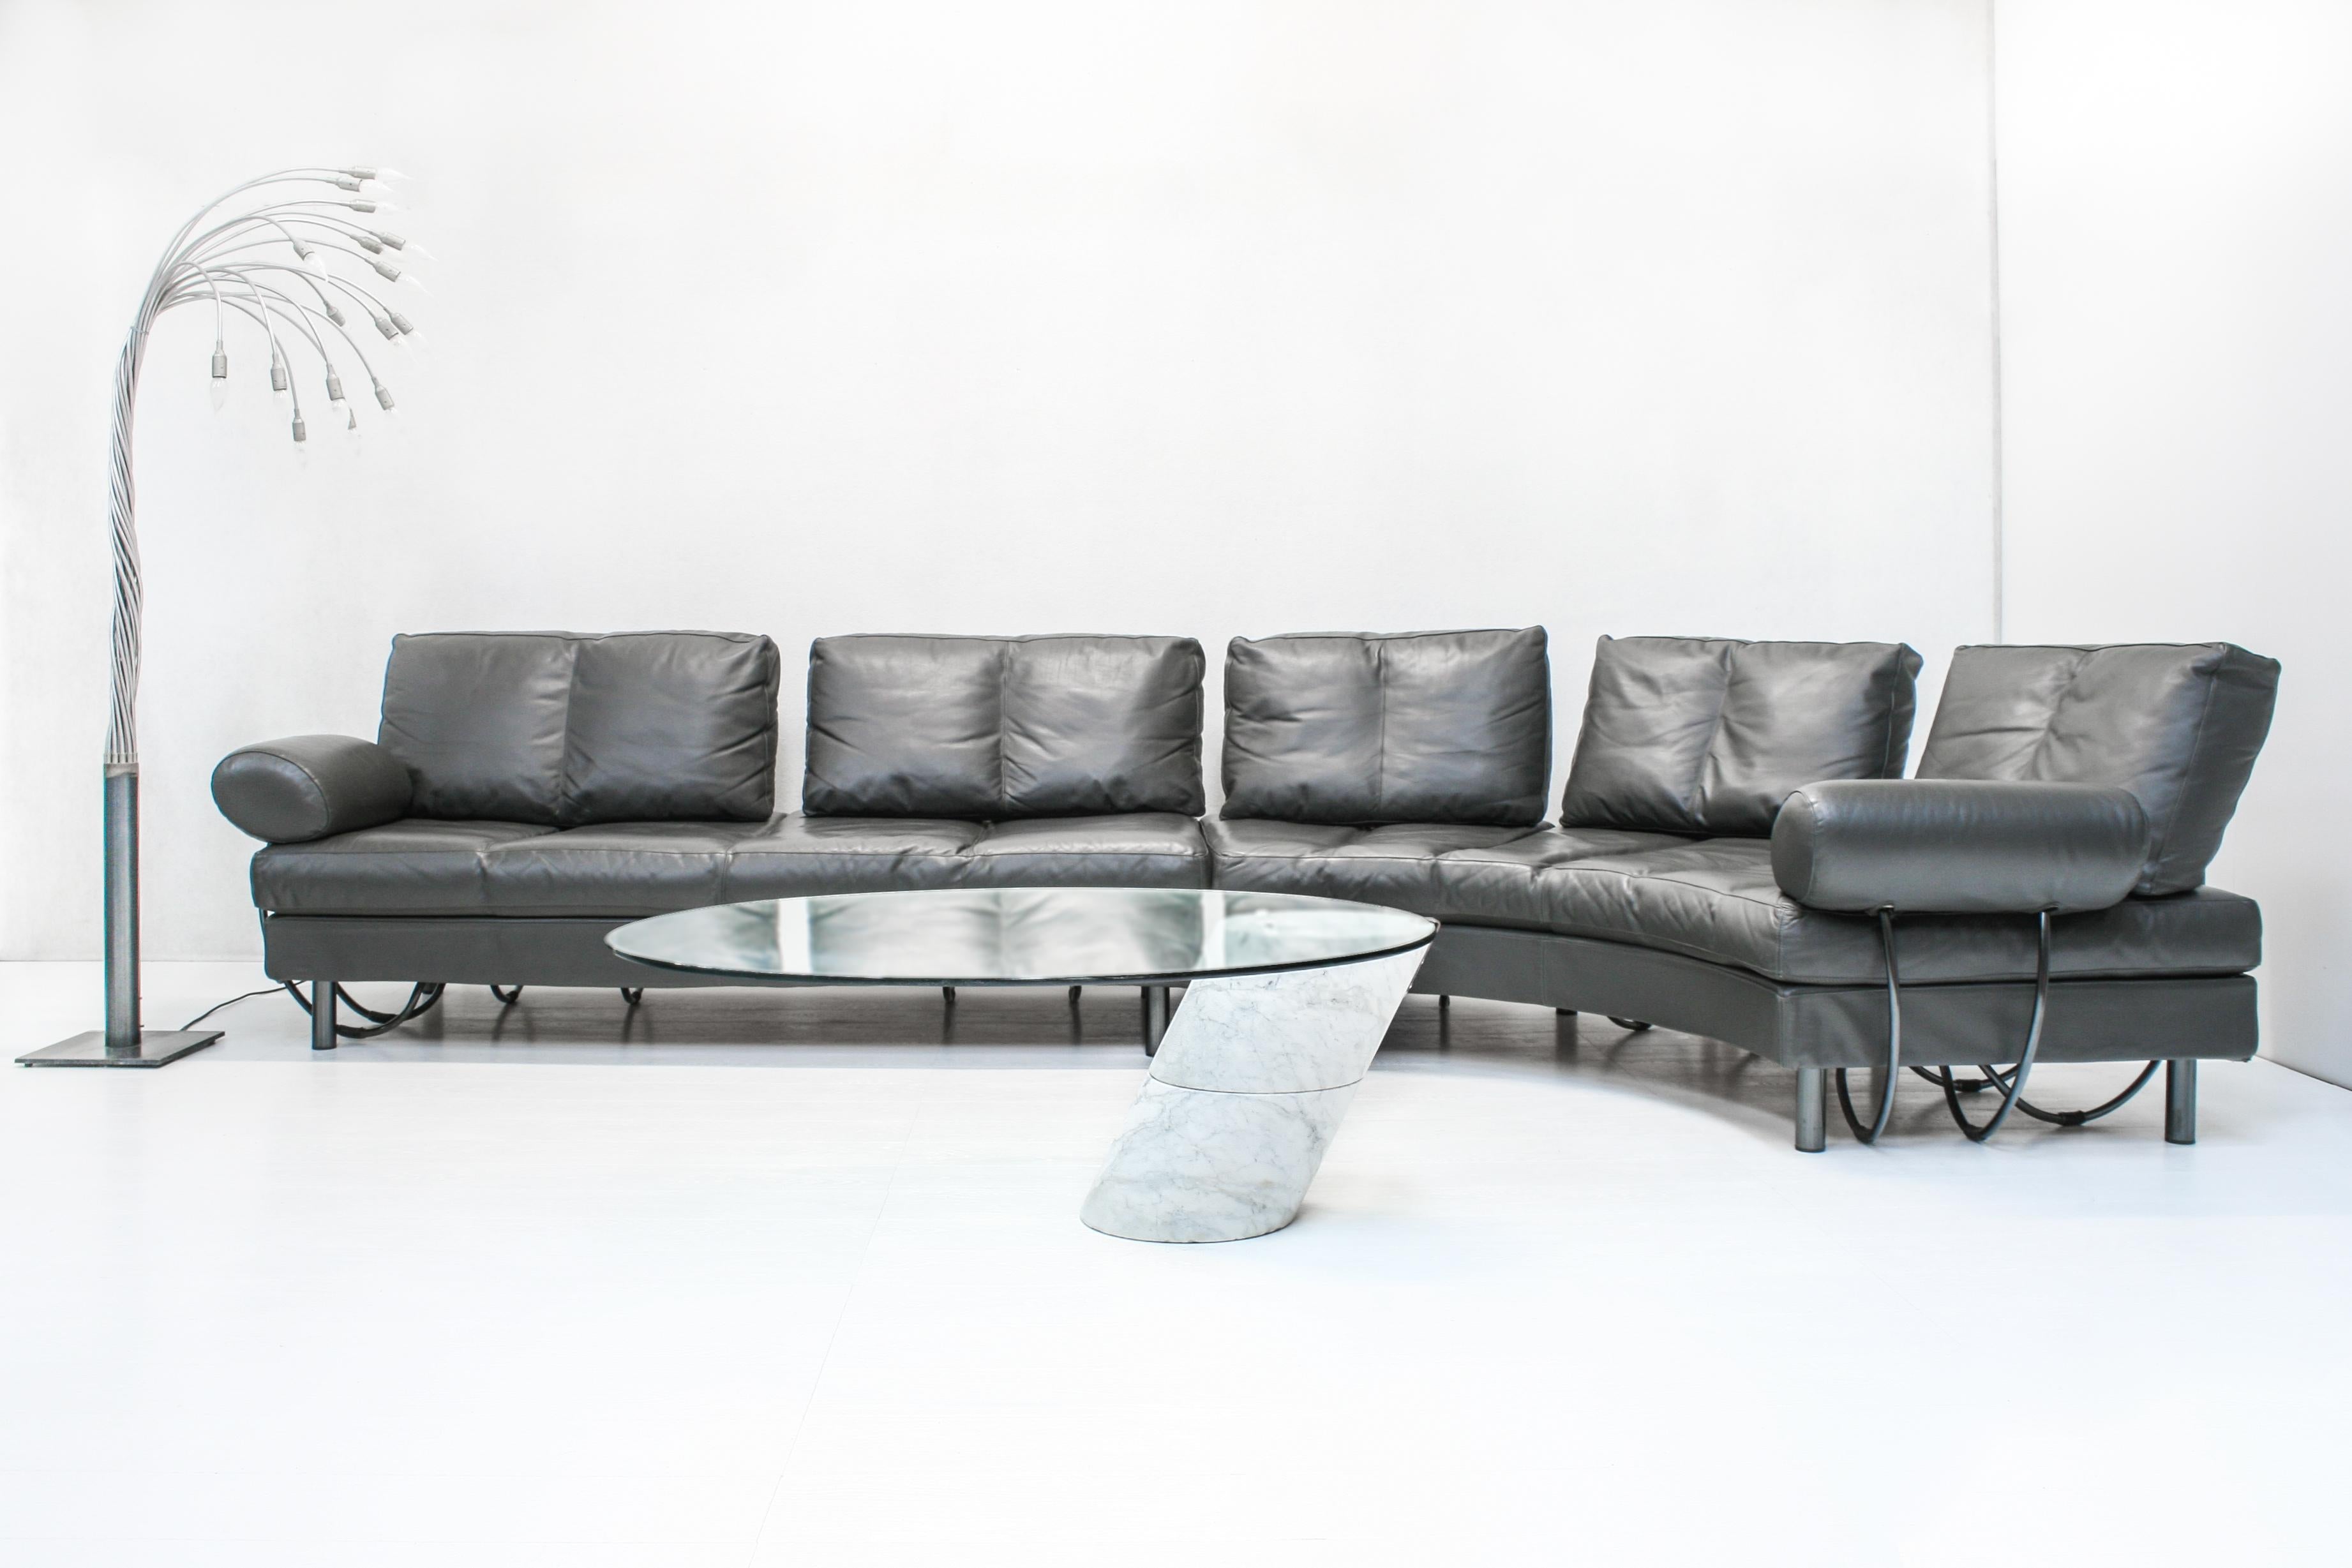 The Divano Europa multifunctional and modular sofa was created by Gianfranco Gualtierotti and Alessandro Mazzoni Delle Stelle and produced by Zanotta, Italy.

The position of the back and armrests can be varied as desired and can be placed anywere